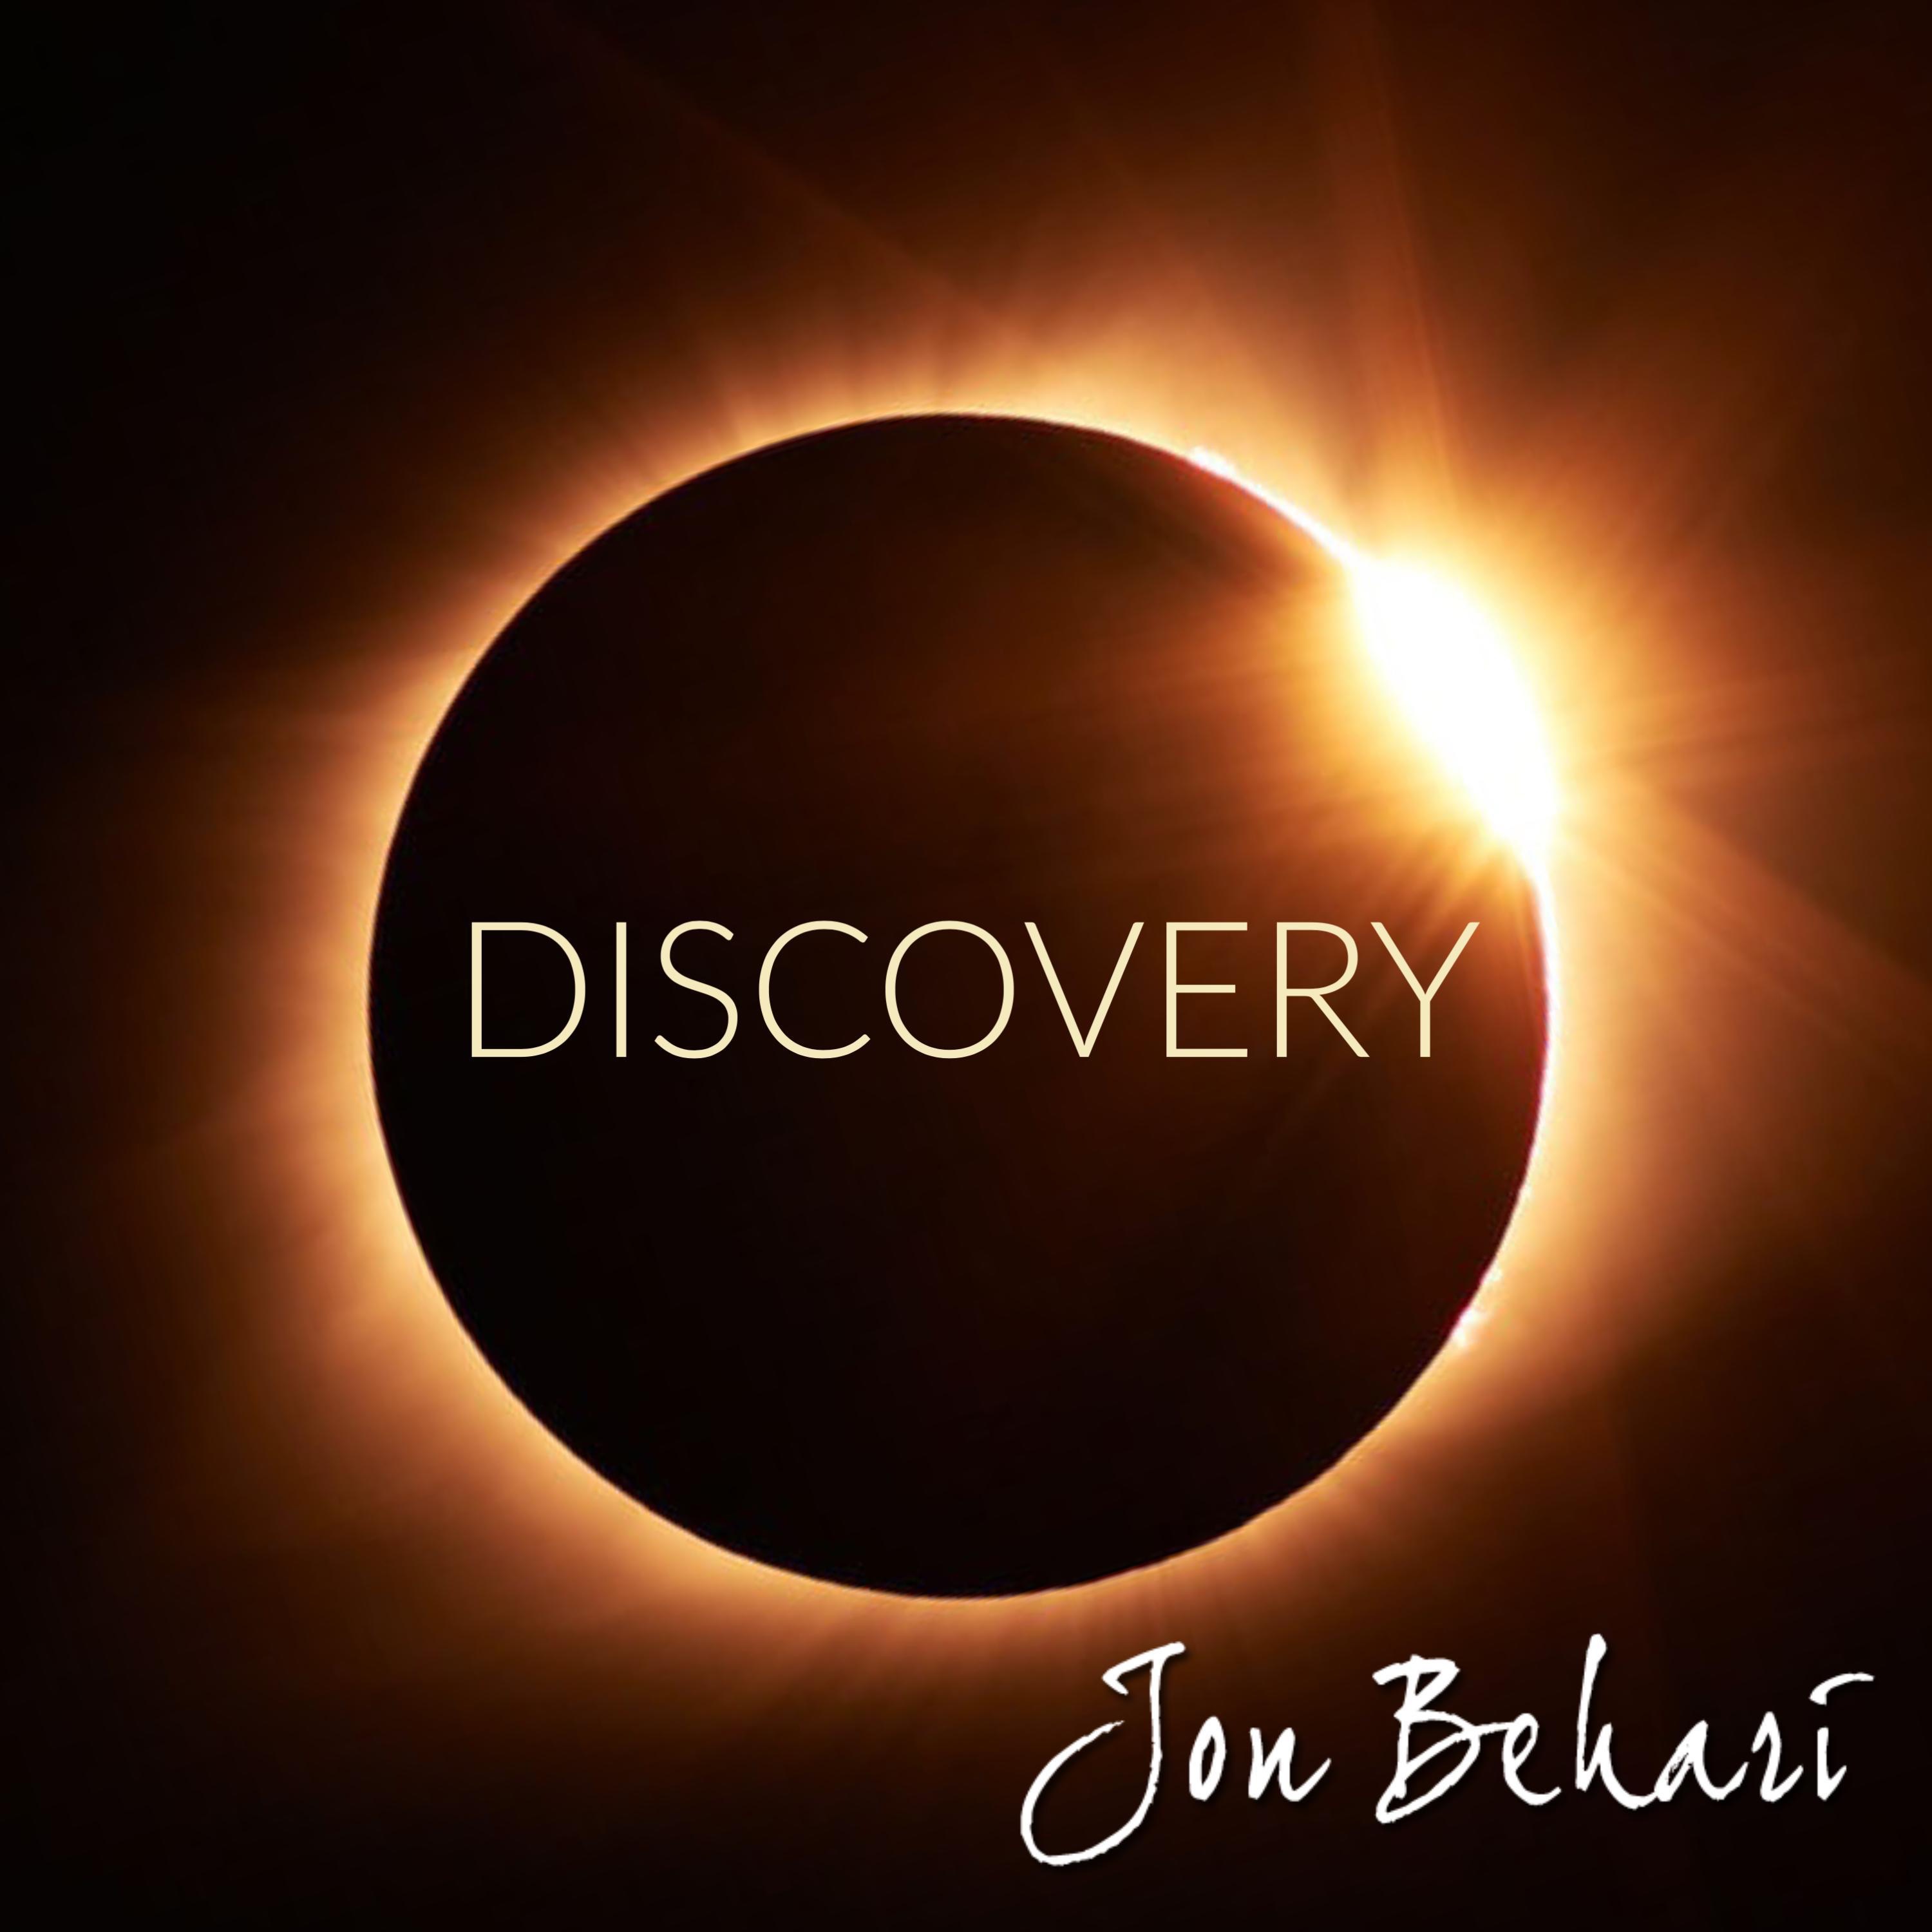 Discovery альбом. Discovery слово. Discovery Jon Dee.